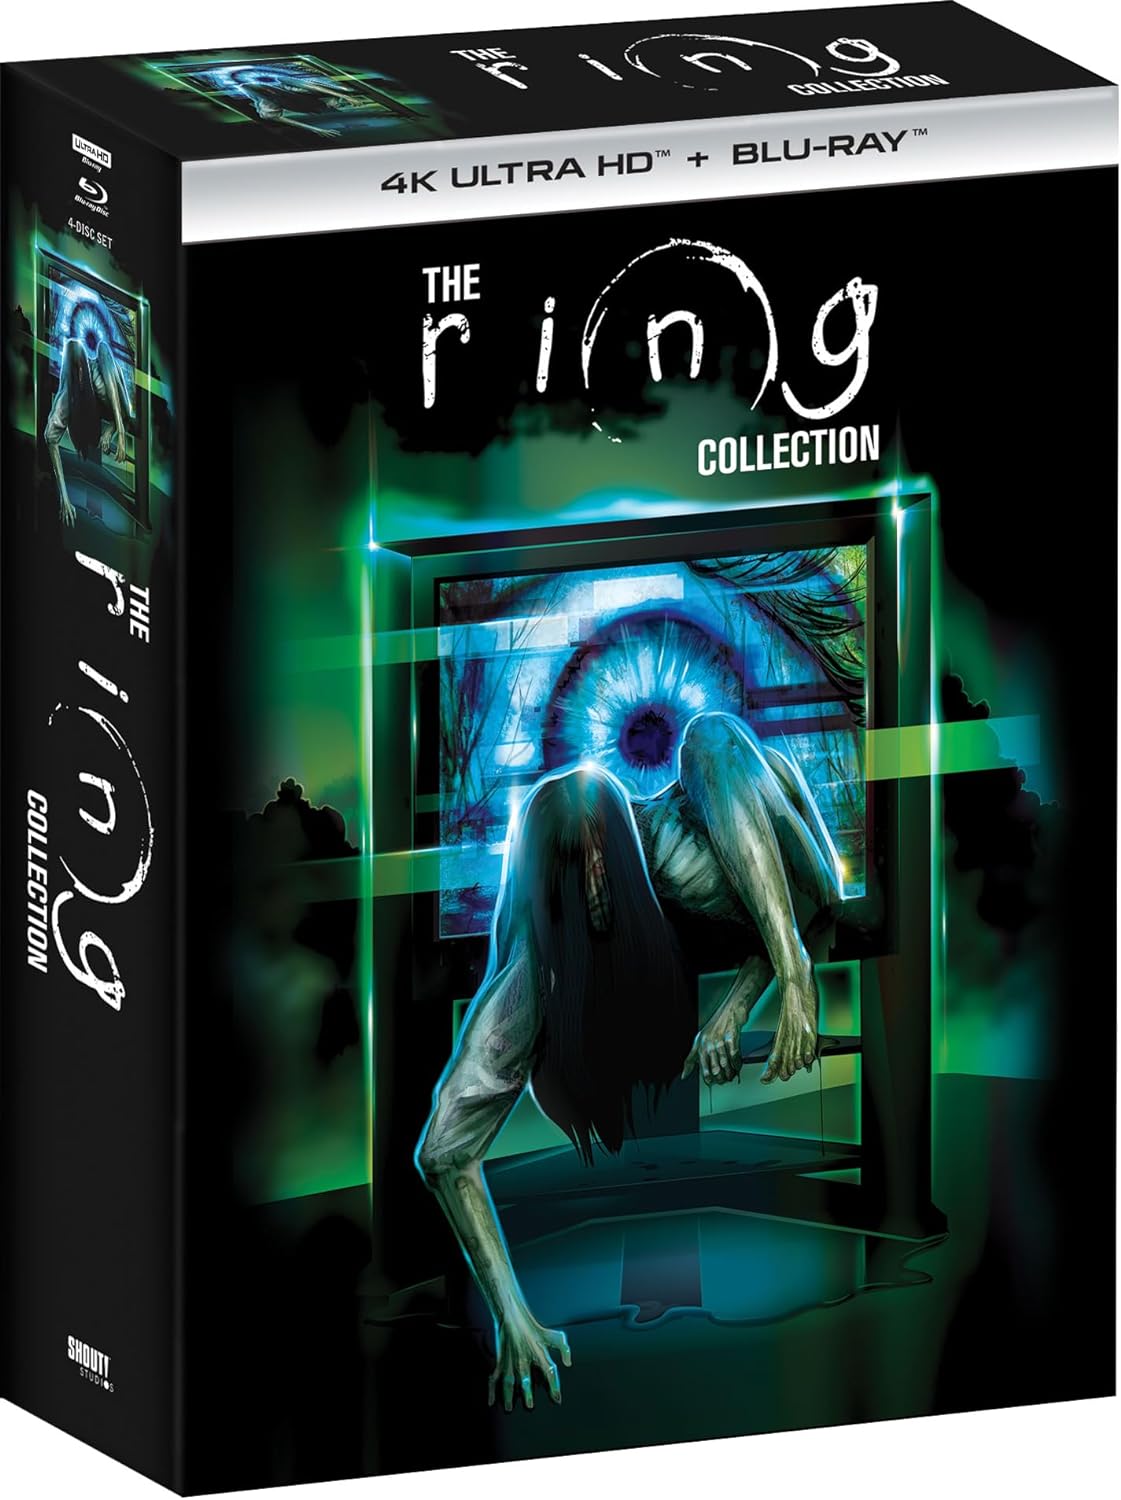 RELEASE DATE: February 3, 2017 TITLE: Rings STUDIO: Paramount Pictures  DIRECTOR: F. Javier Gutierrez PLOT: A young woman finds herself on the  receiving end of a terrifying curse that threatens to take